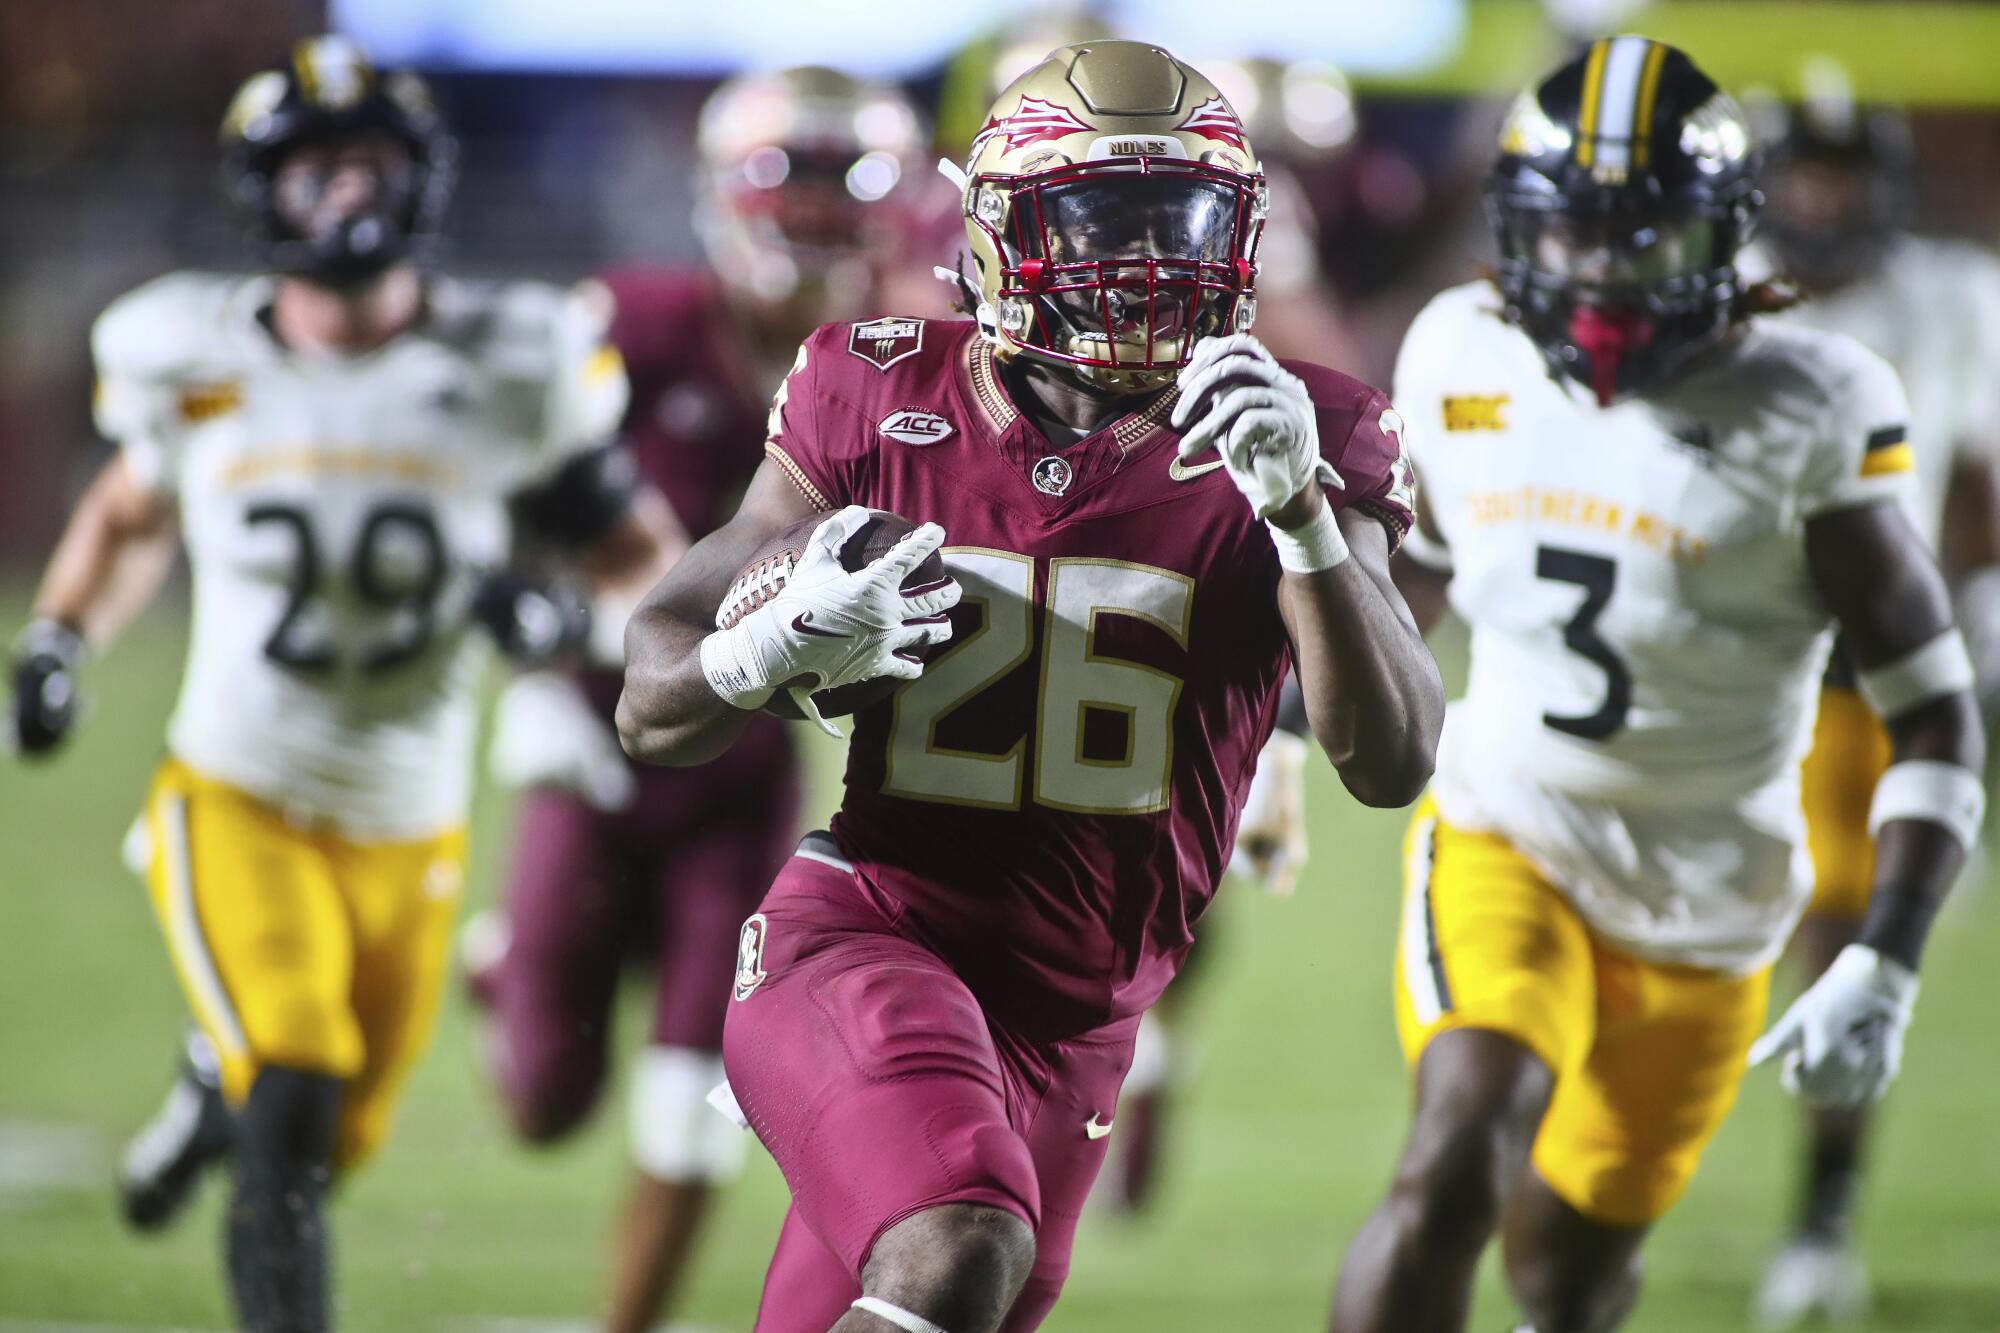 Florida State running back Caziah Holmes scores on a touchdown run against Southern Mississippi.